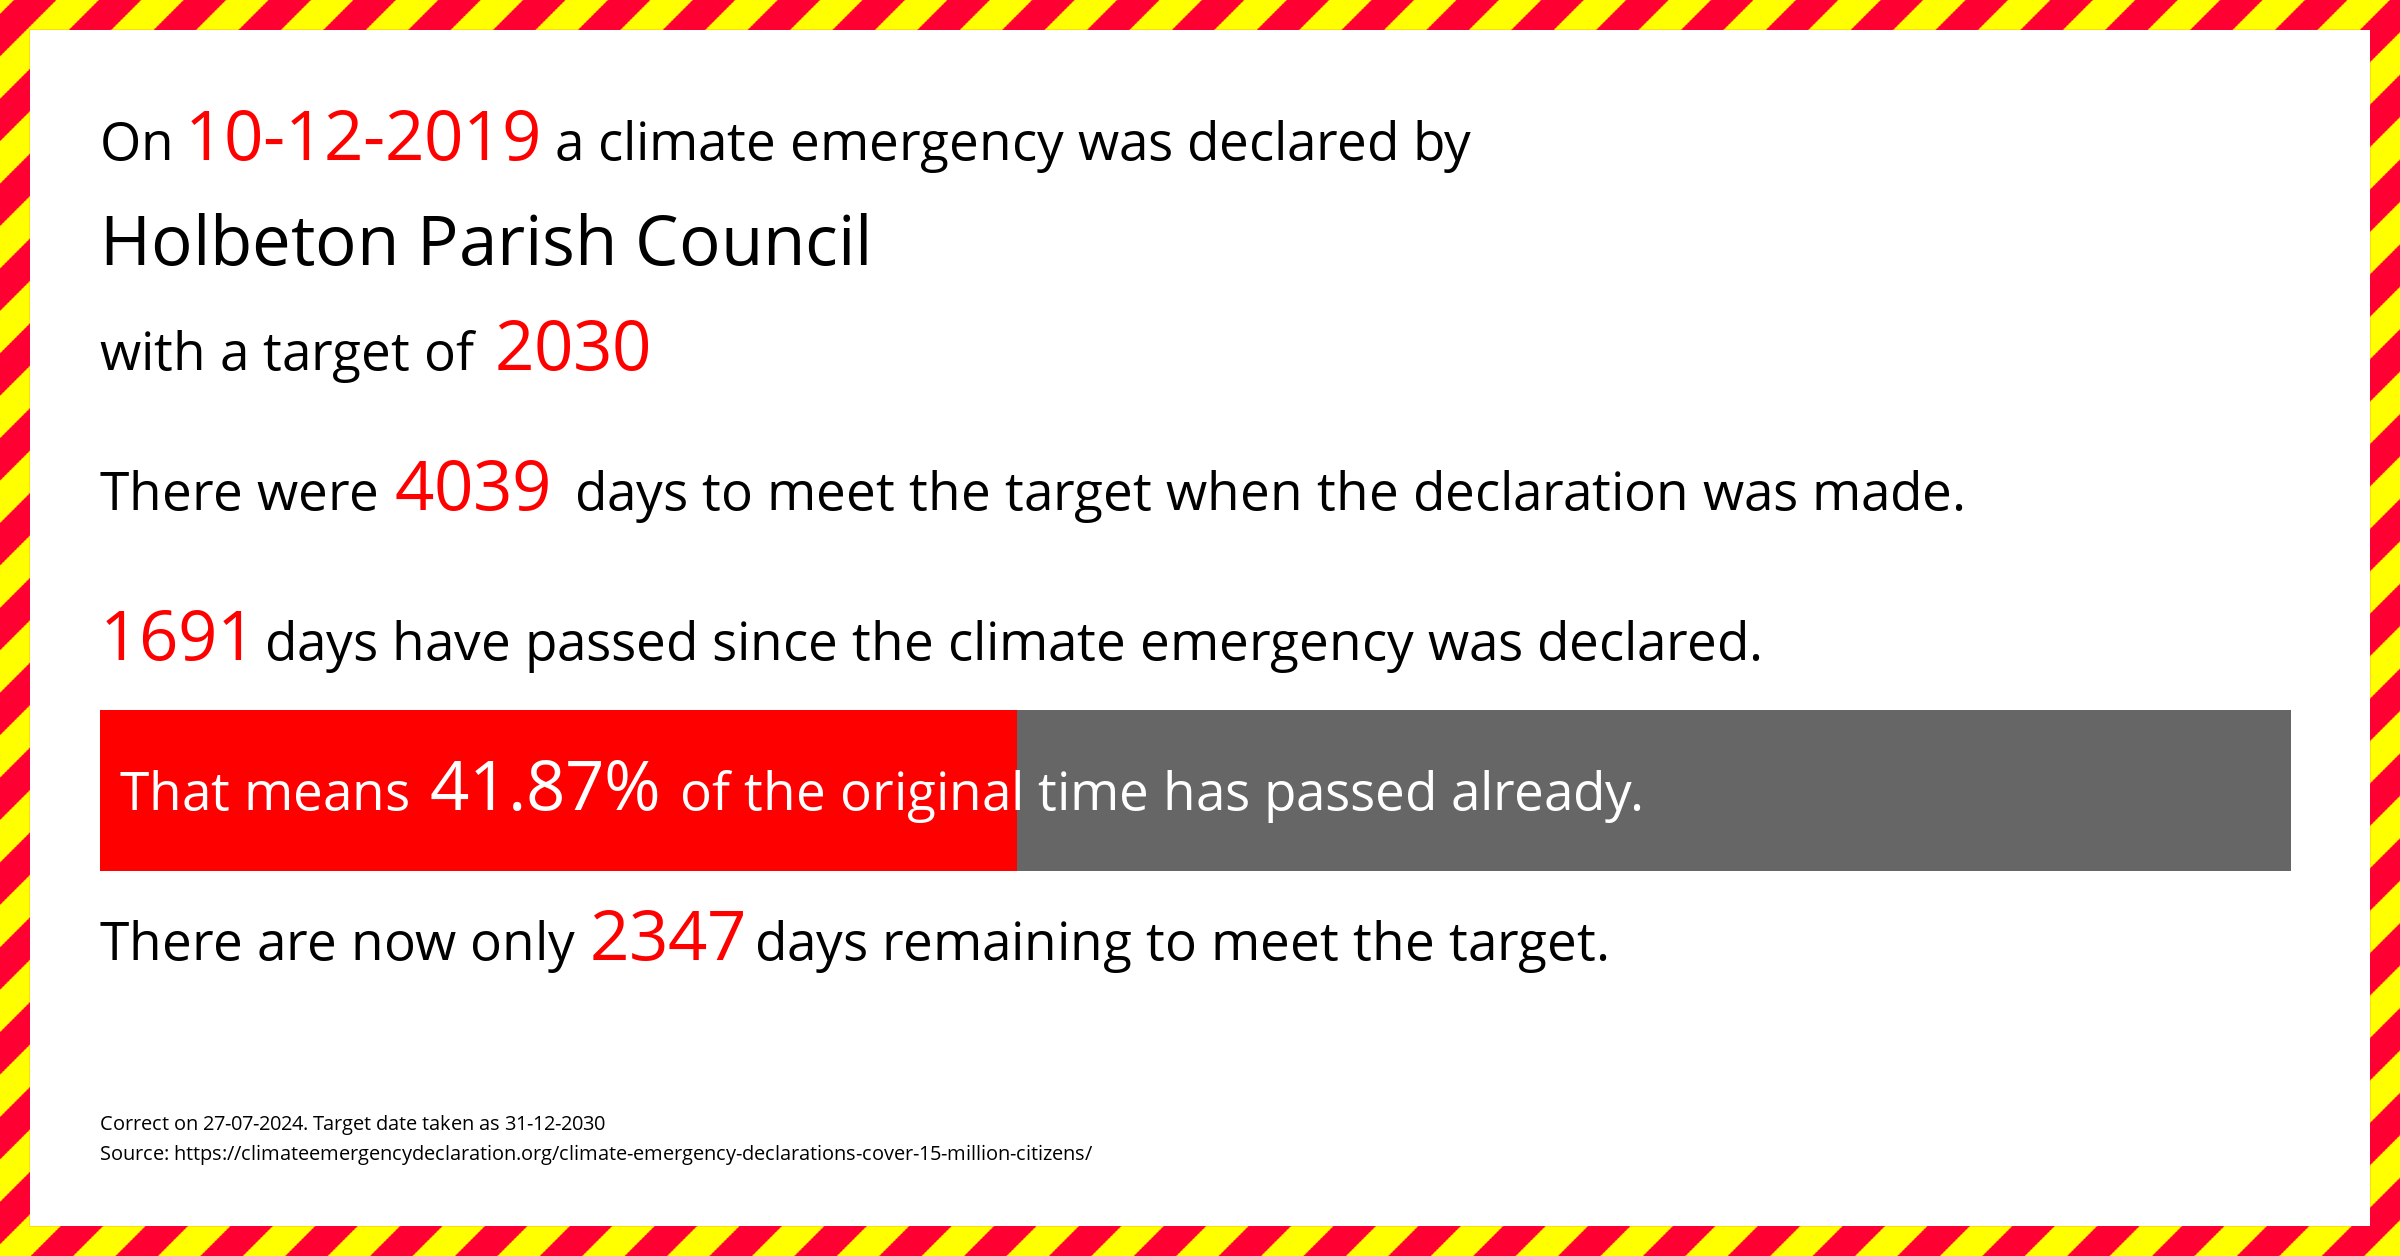 Holbeton Parish Council declared a Climate emergency on Tuesday 10th December 2019, with a target of 2030.